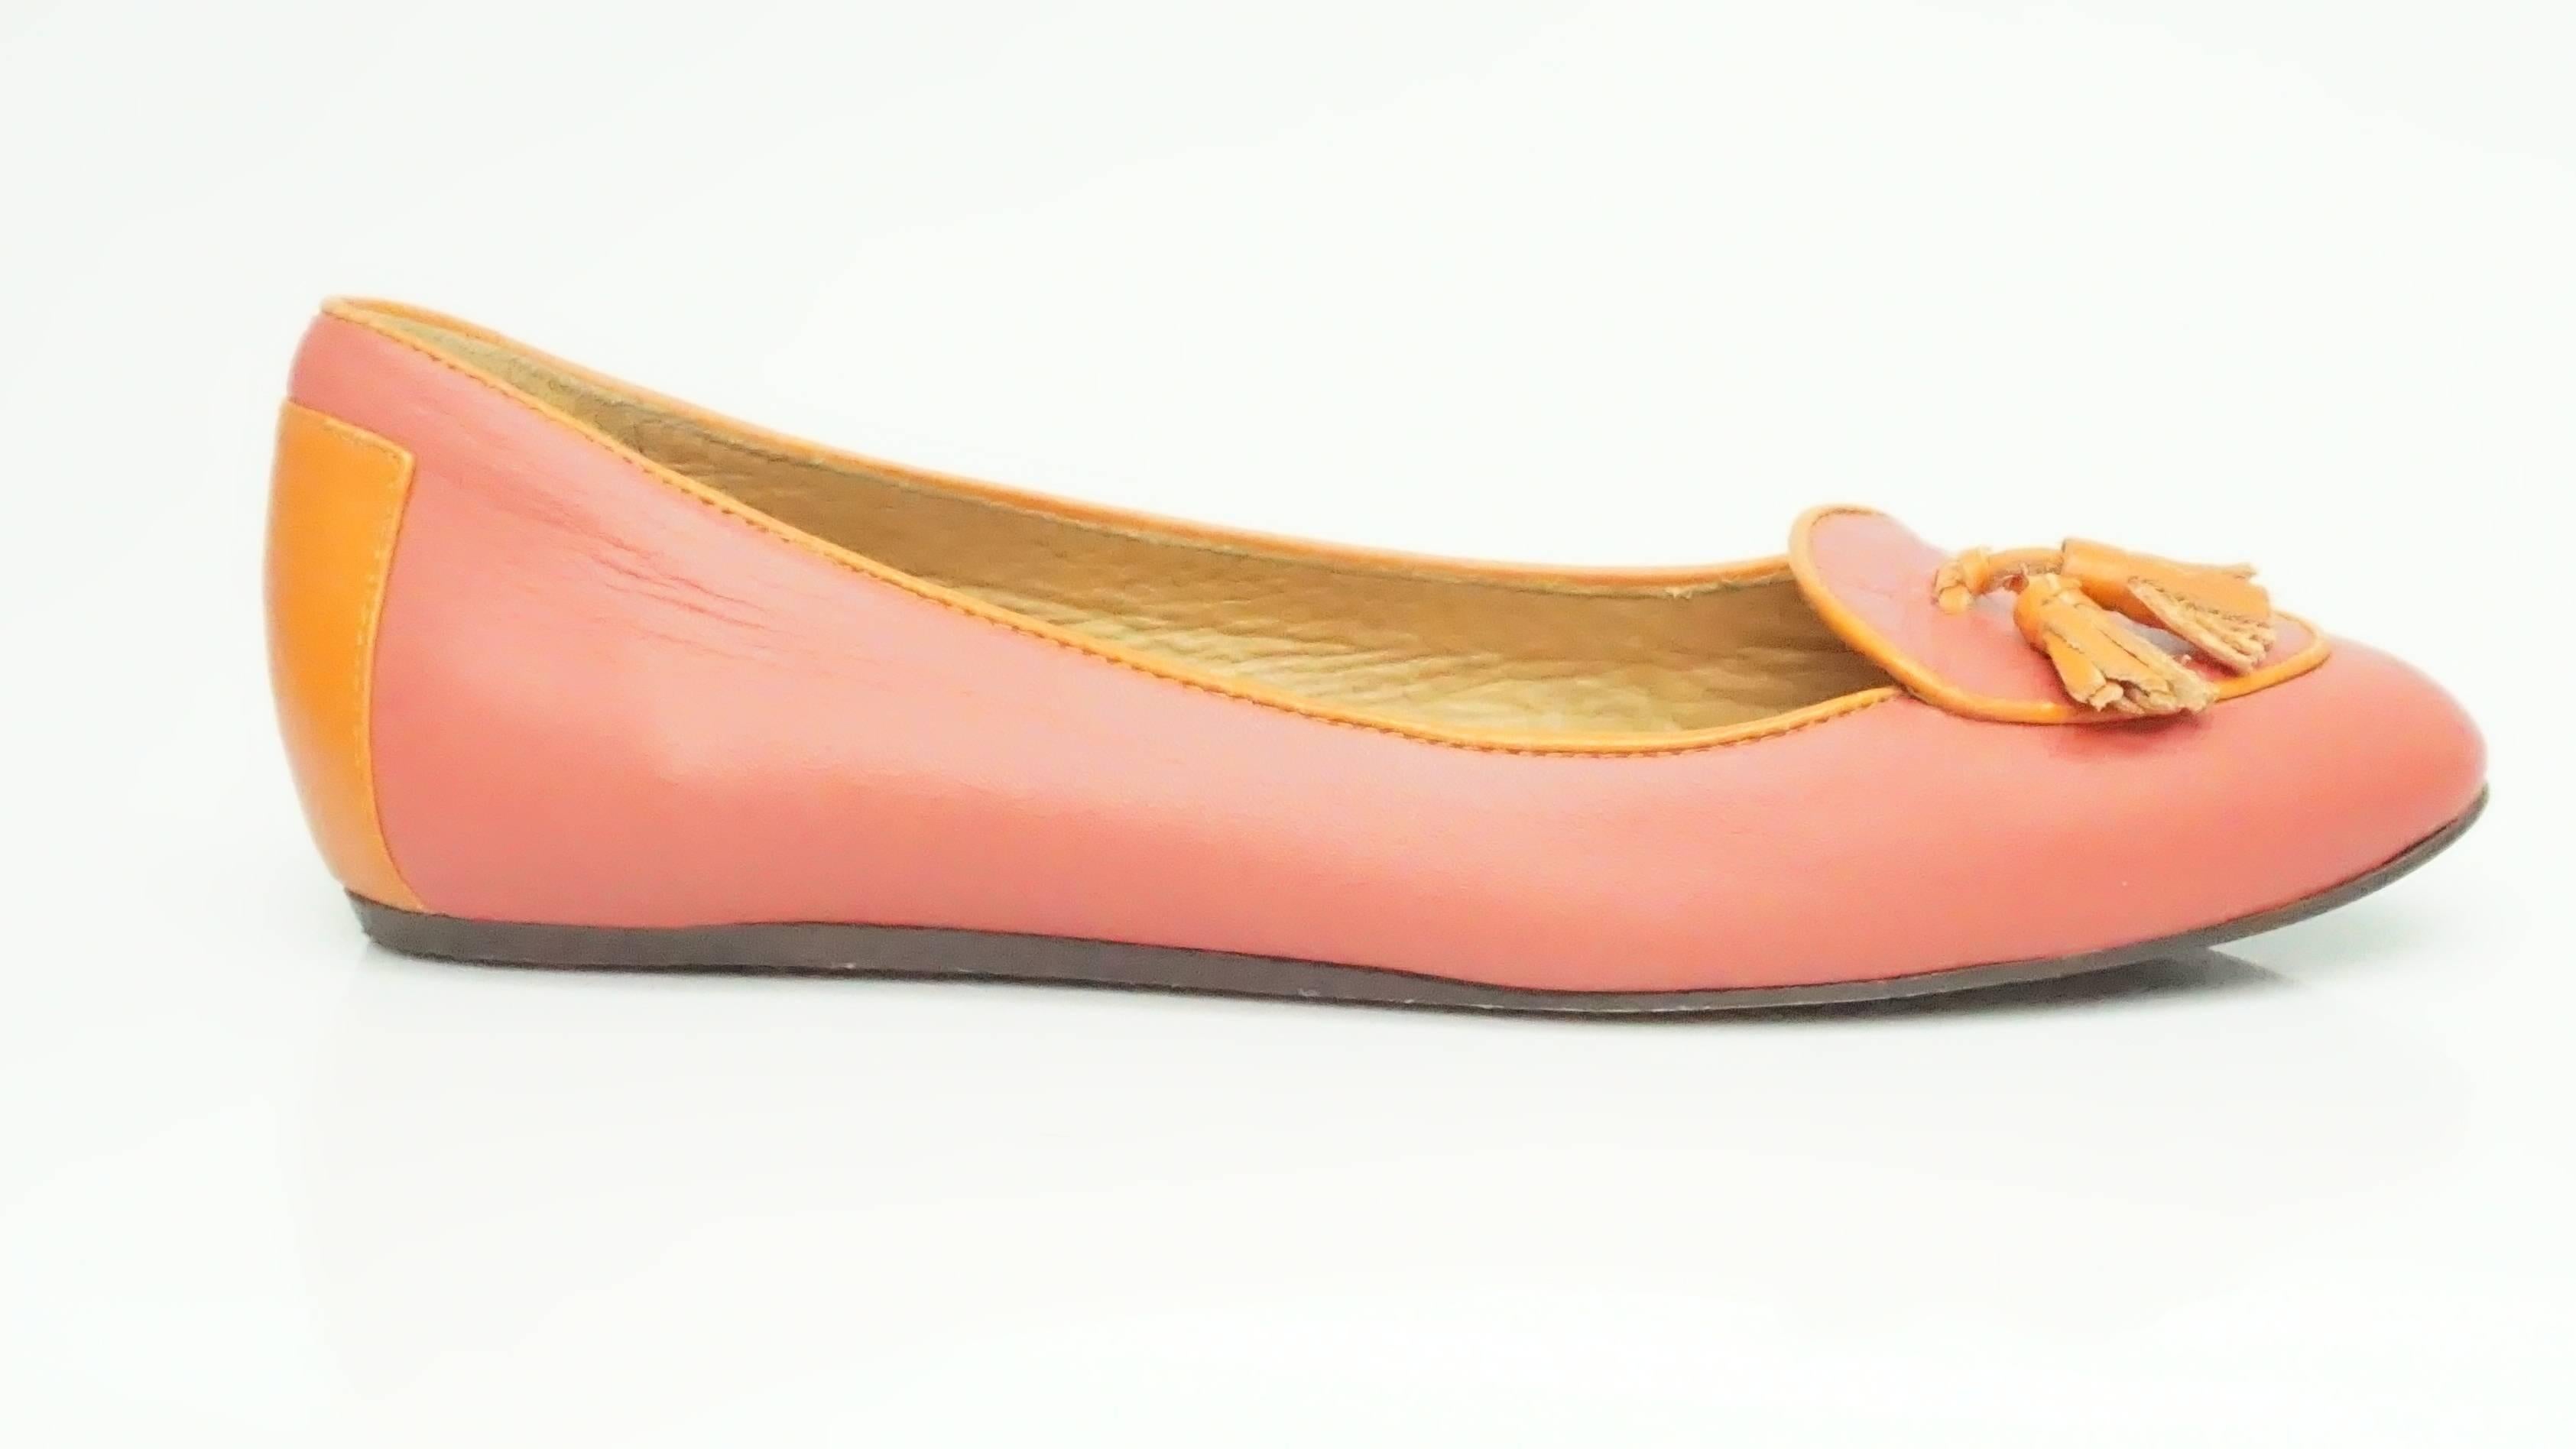 Lanvin Coral and Orange Tassel Loafers - 37.5  These colorful loafers are in good condition. The color of the shoe is a bright coral and has orange details. The loafer has a nice tassel detail in the front of the shoe and and orange patch on the